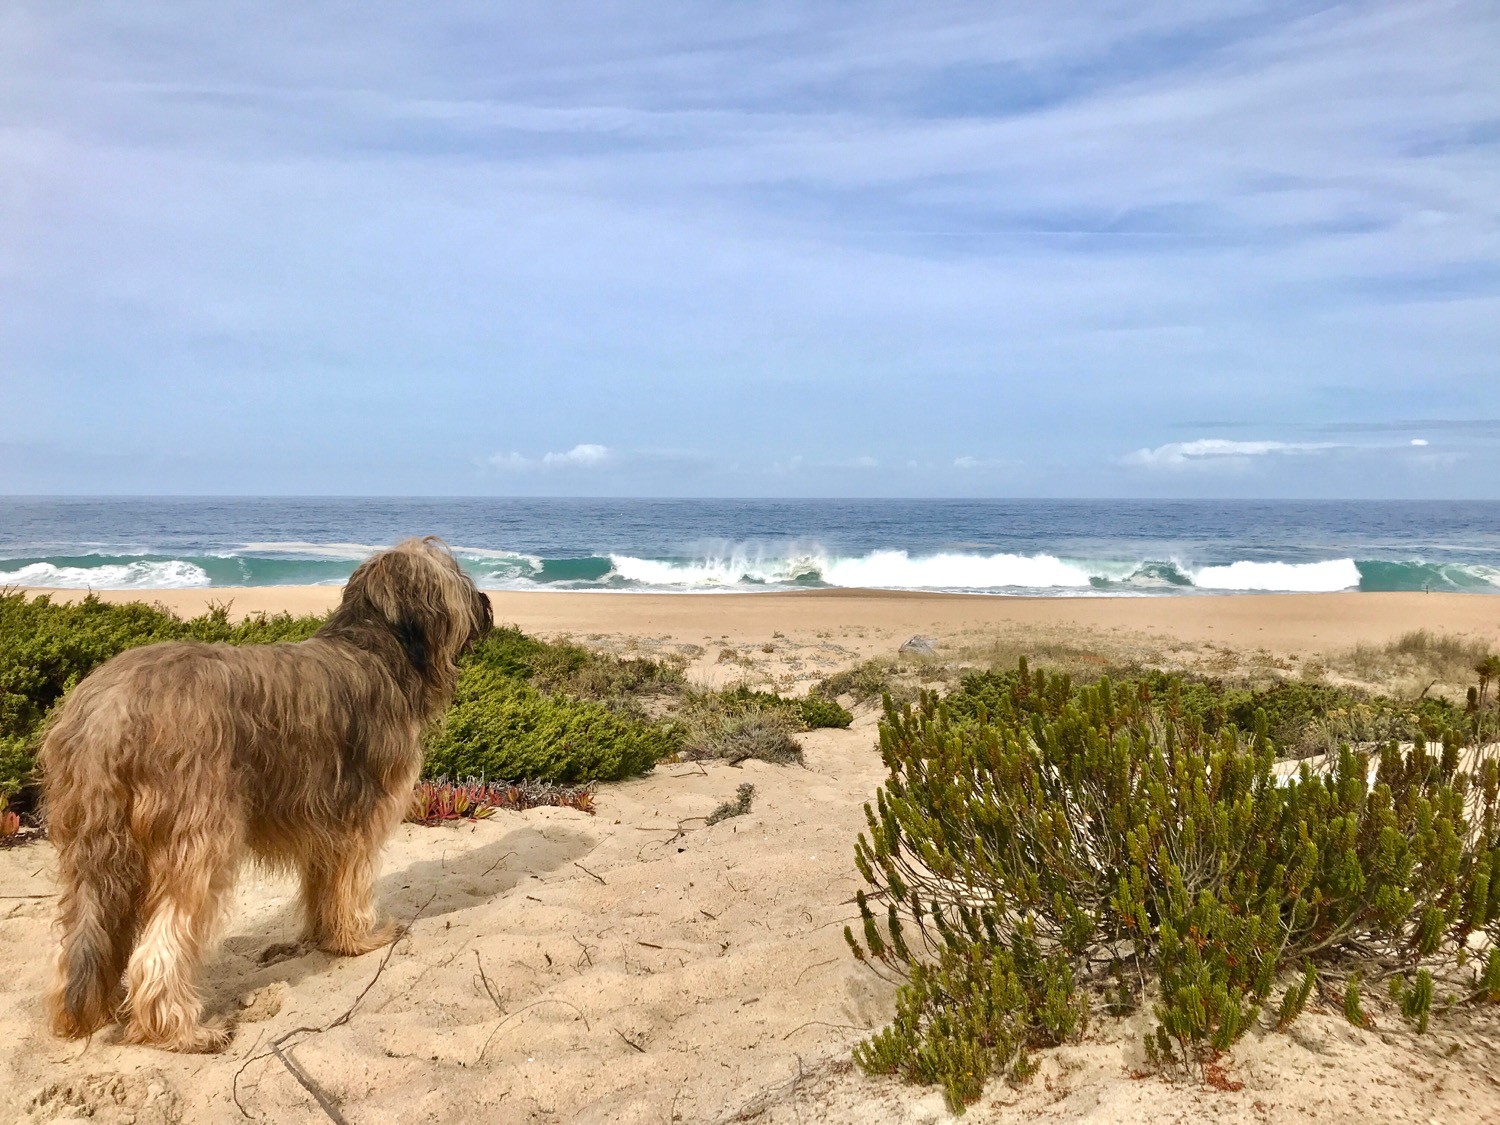 Portugal - ... was will Hund Meer?!?